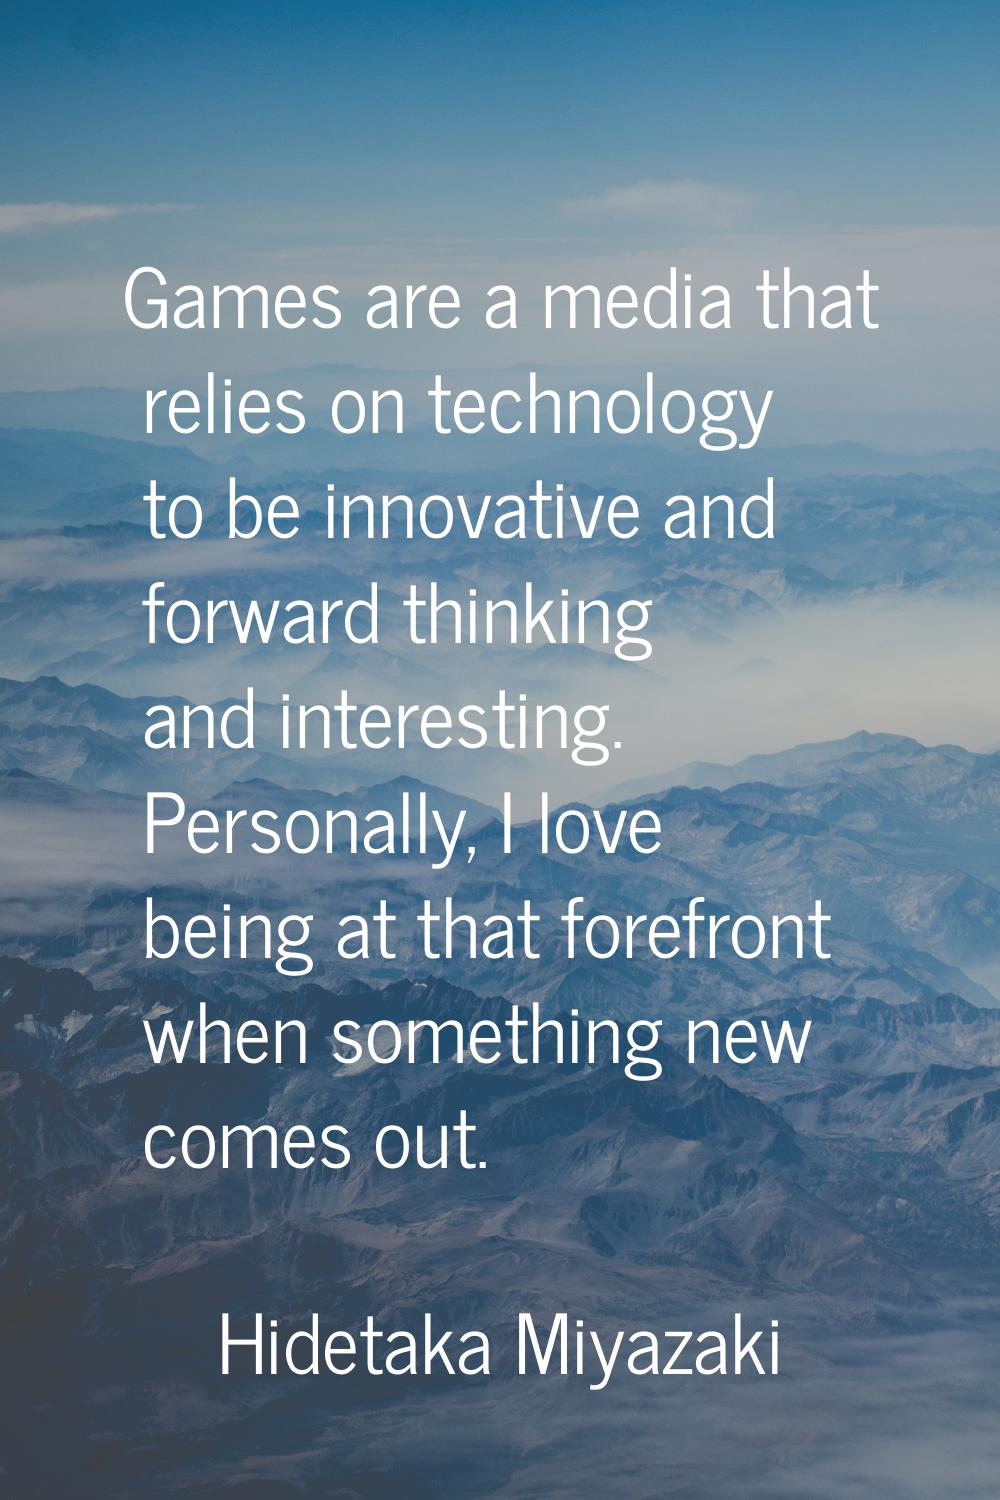 Games are a media that relies on technology to be innovative and forward thinking and interesting. 